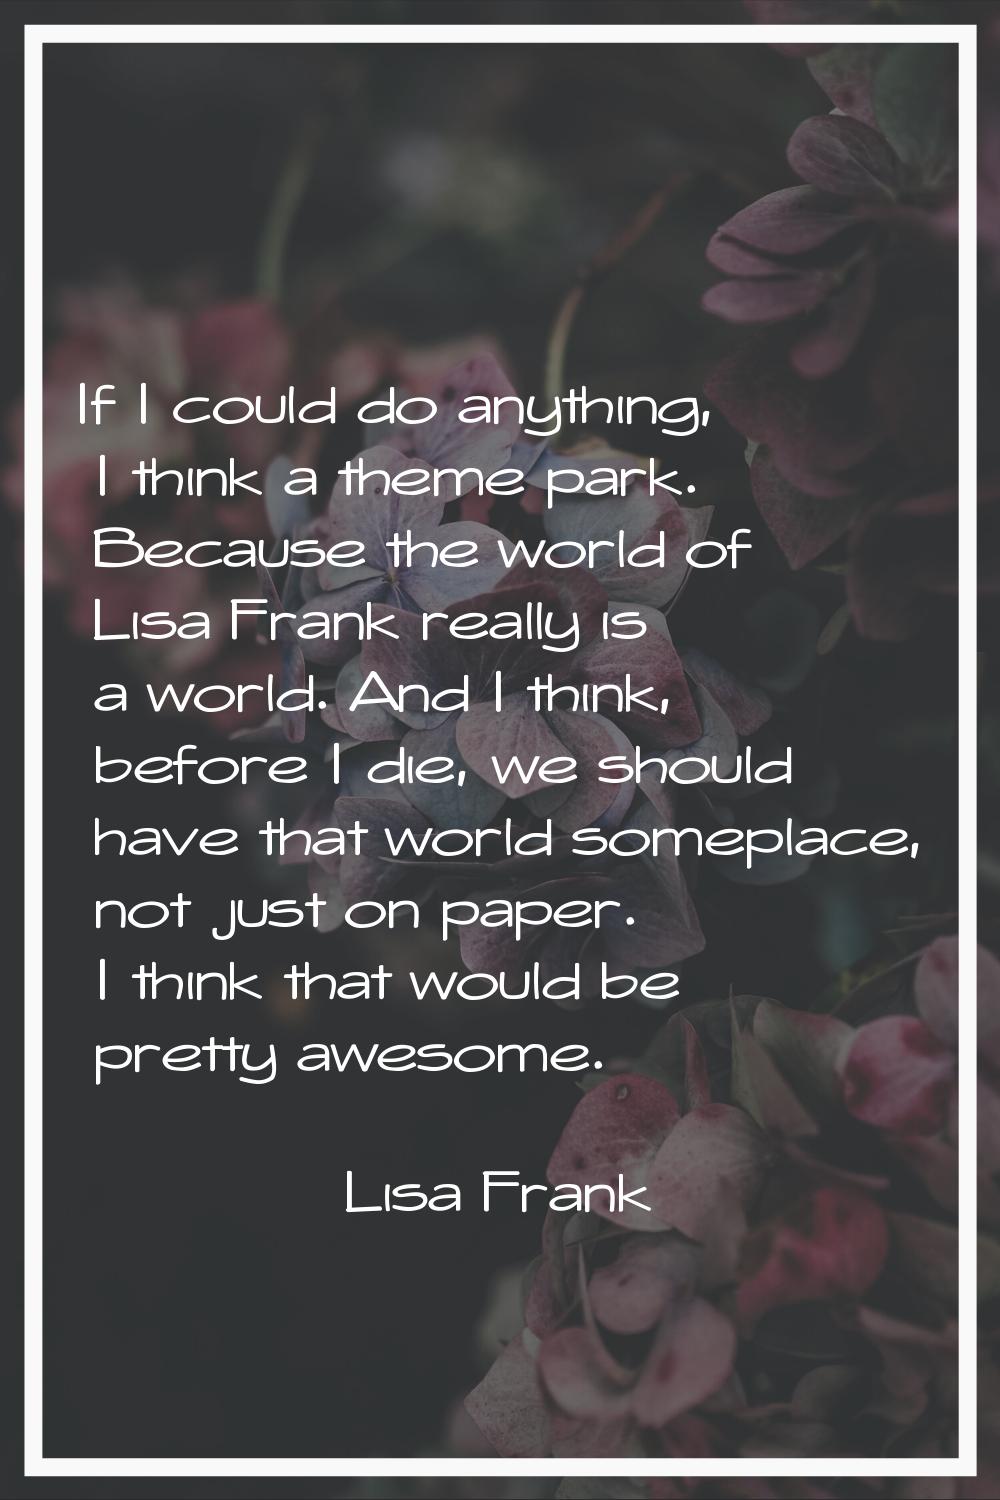 If I could do anything, I think a theme park. Because the world of Lisa Frank really is a world. An